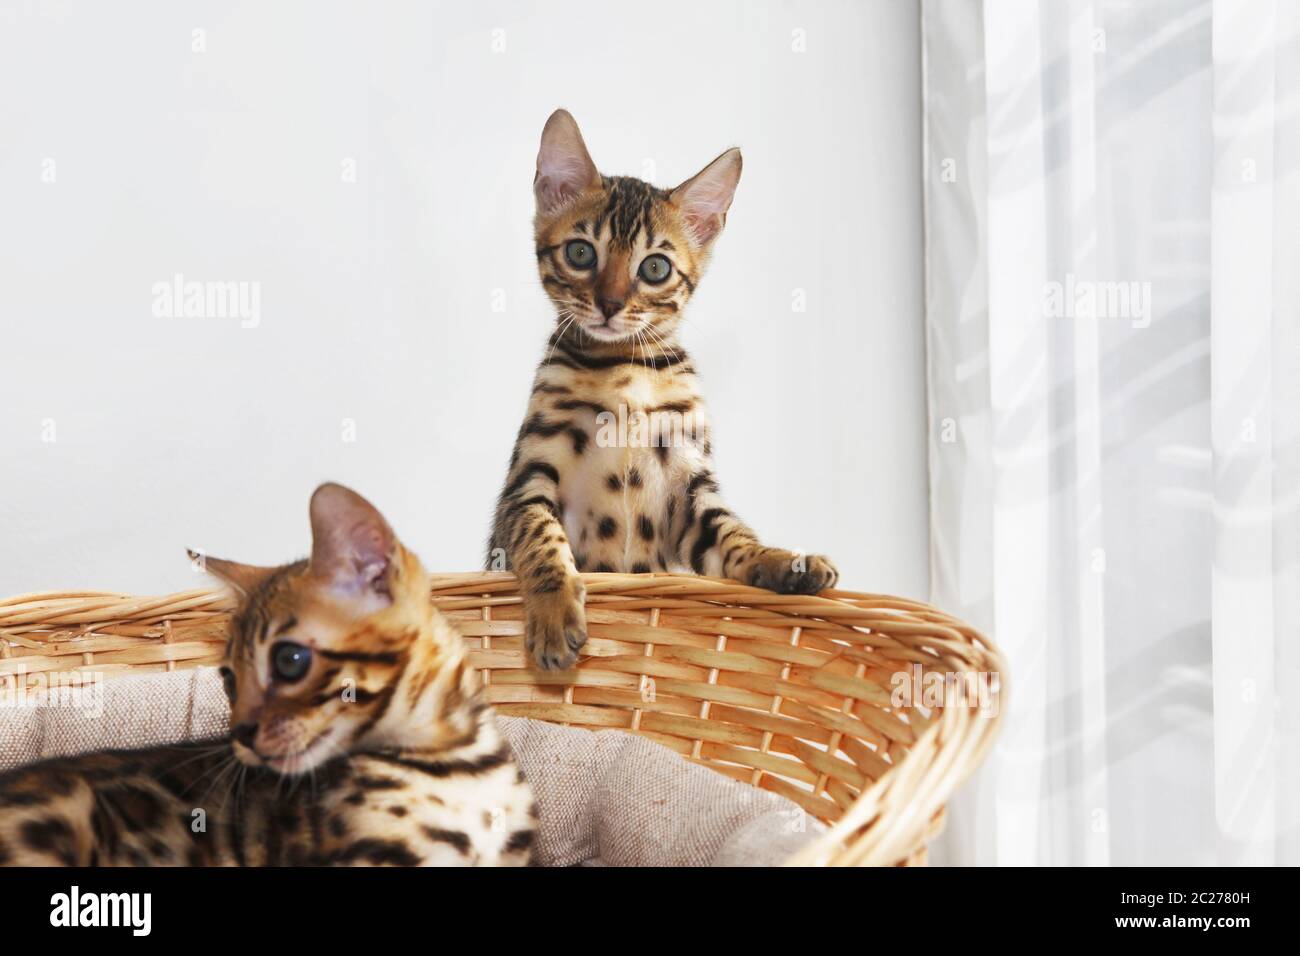 Small bengal kitten in a basket Stock Photo